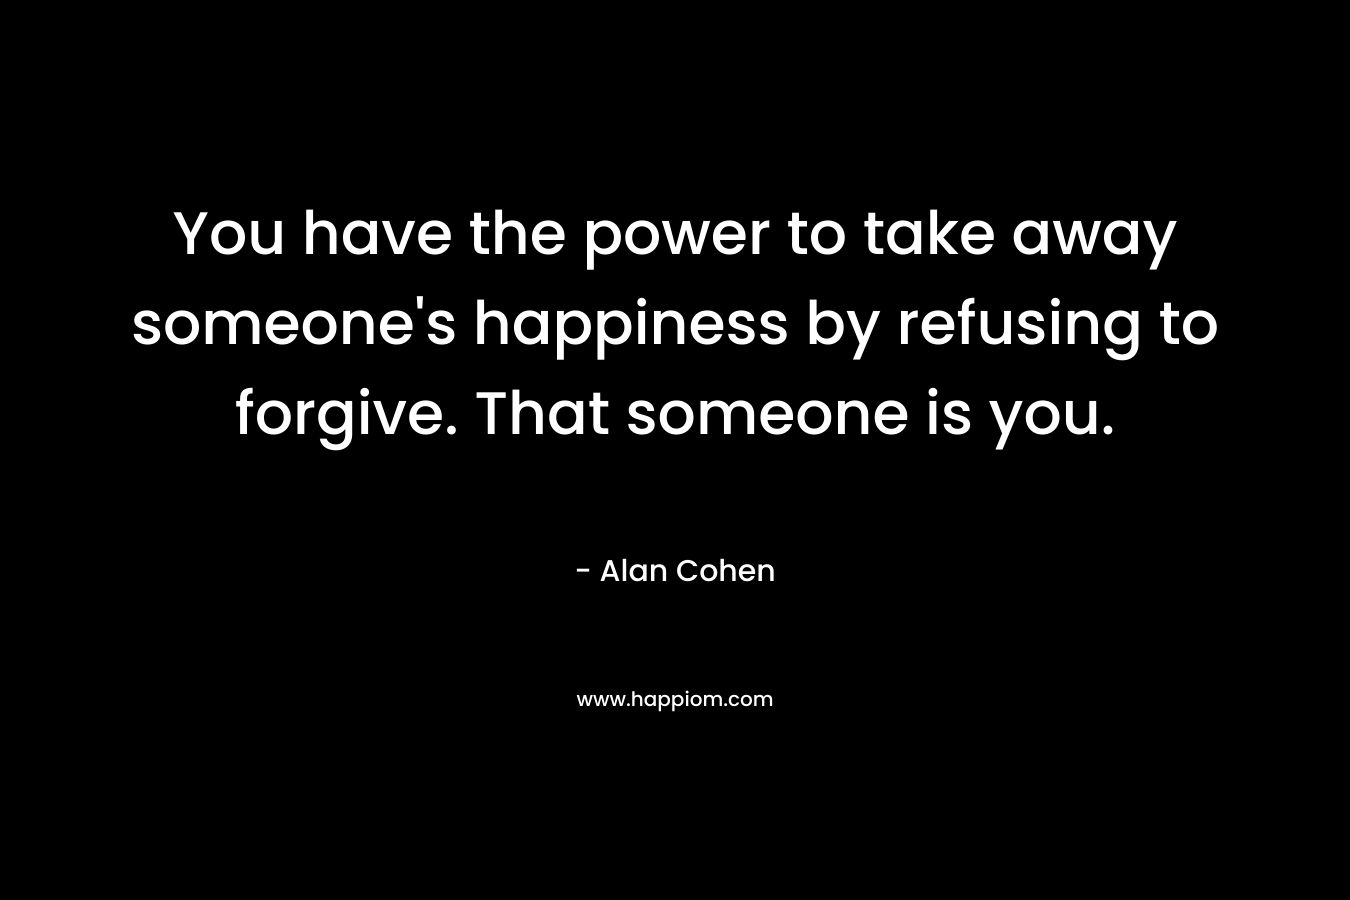 You have the power to take away someone’s happiness by refusing to forgive. That someone is you. – Alan Cohen